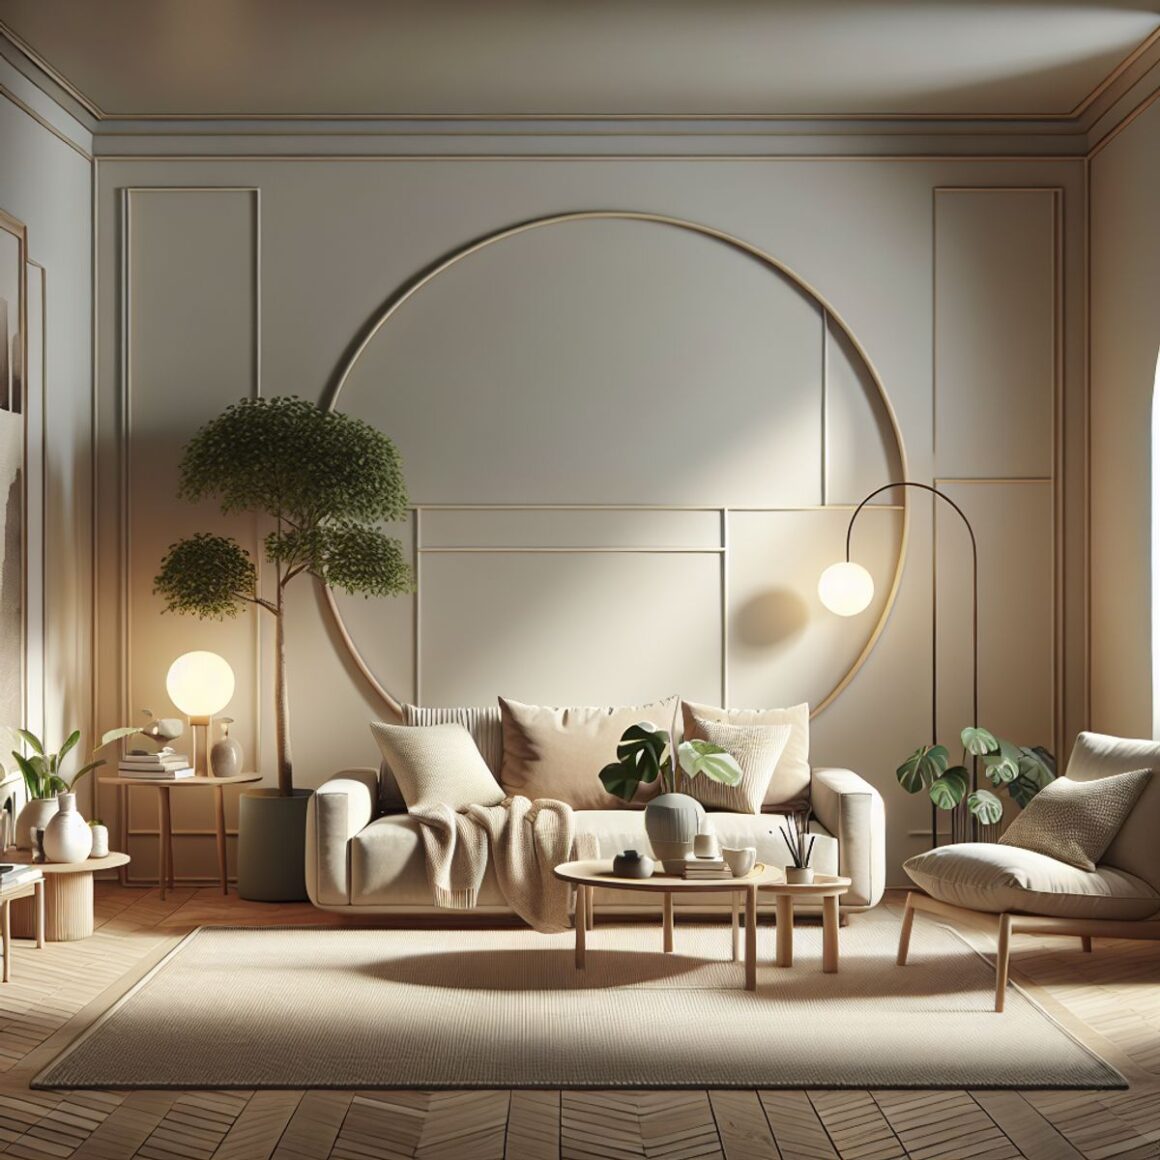 A serene living room with minimalistic decor and neutral colors, featuring soft lighting and cozy furniture.